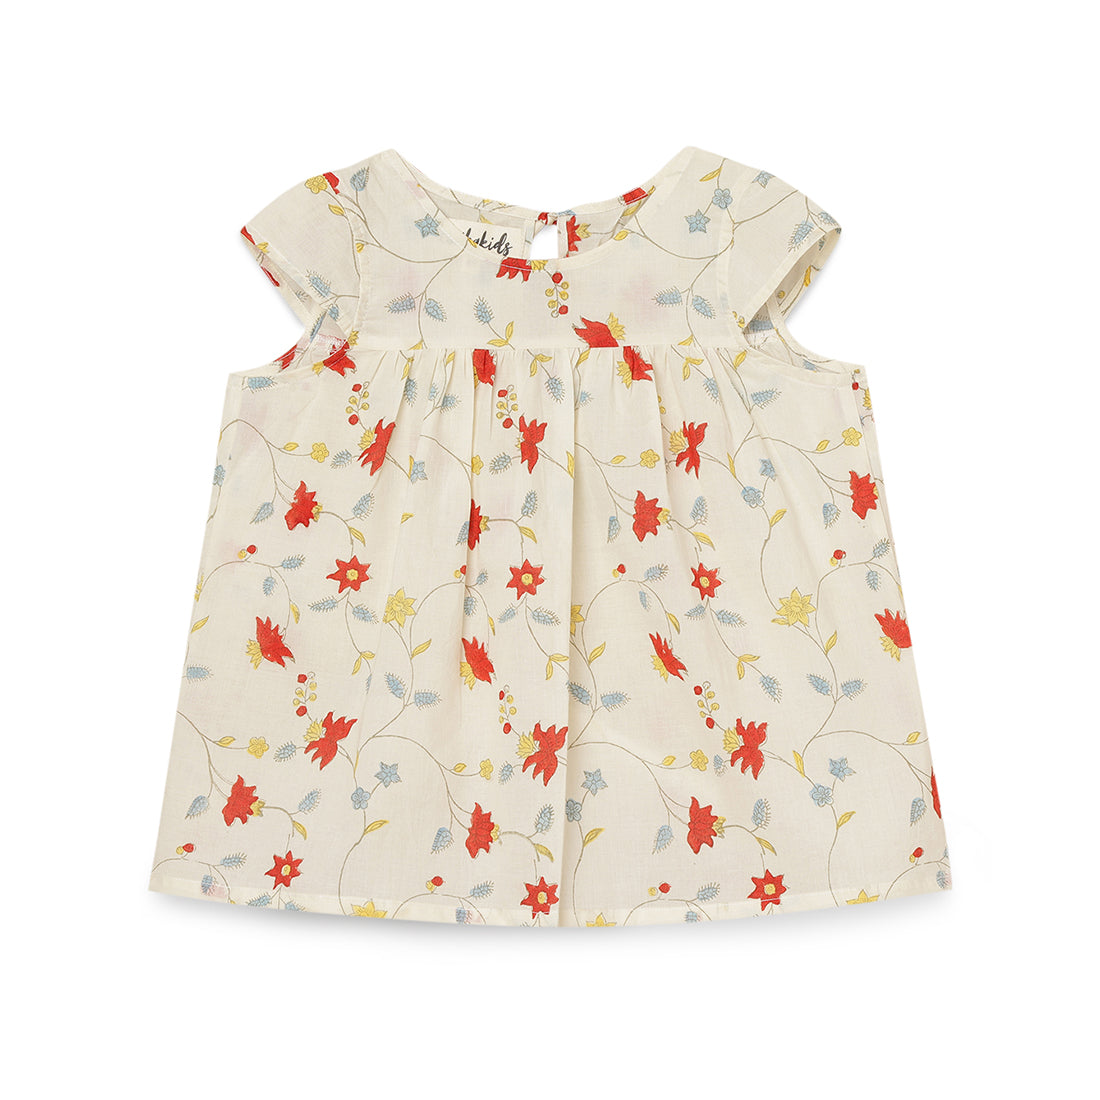 Girls Top and Shorts Set with Poppy Print 2 yrs to 6 yrs - Front